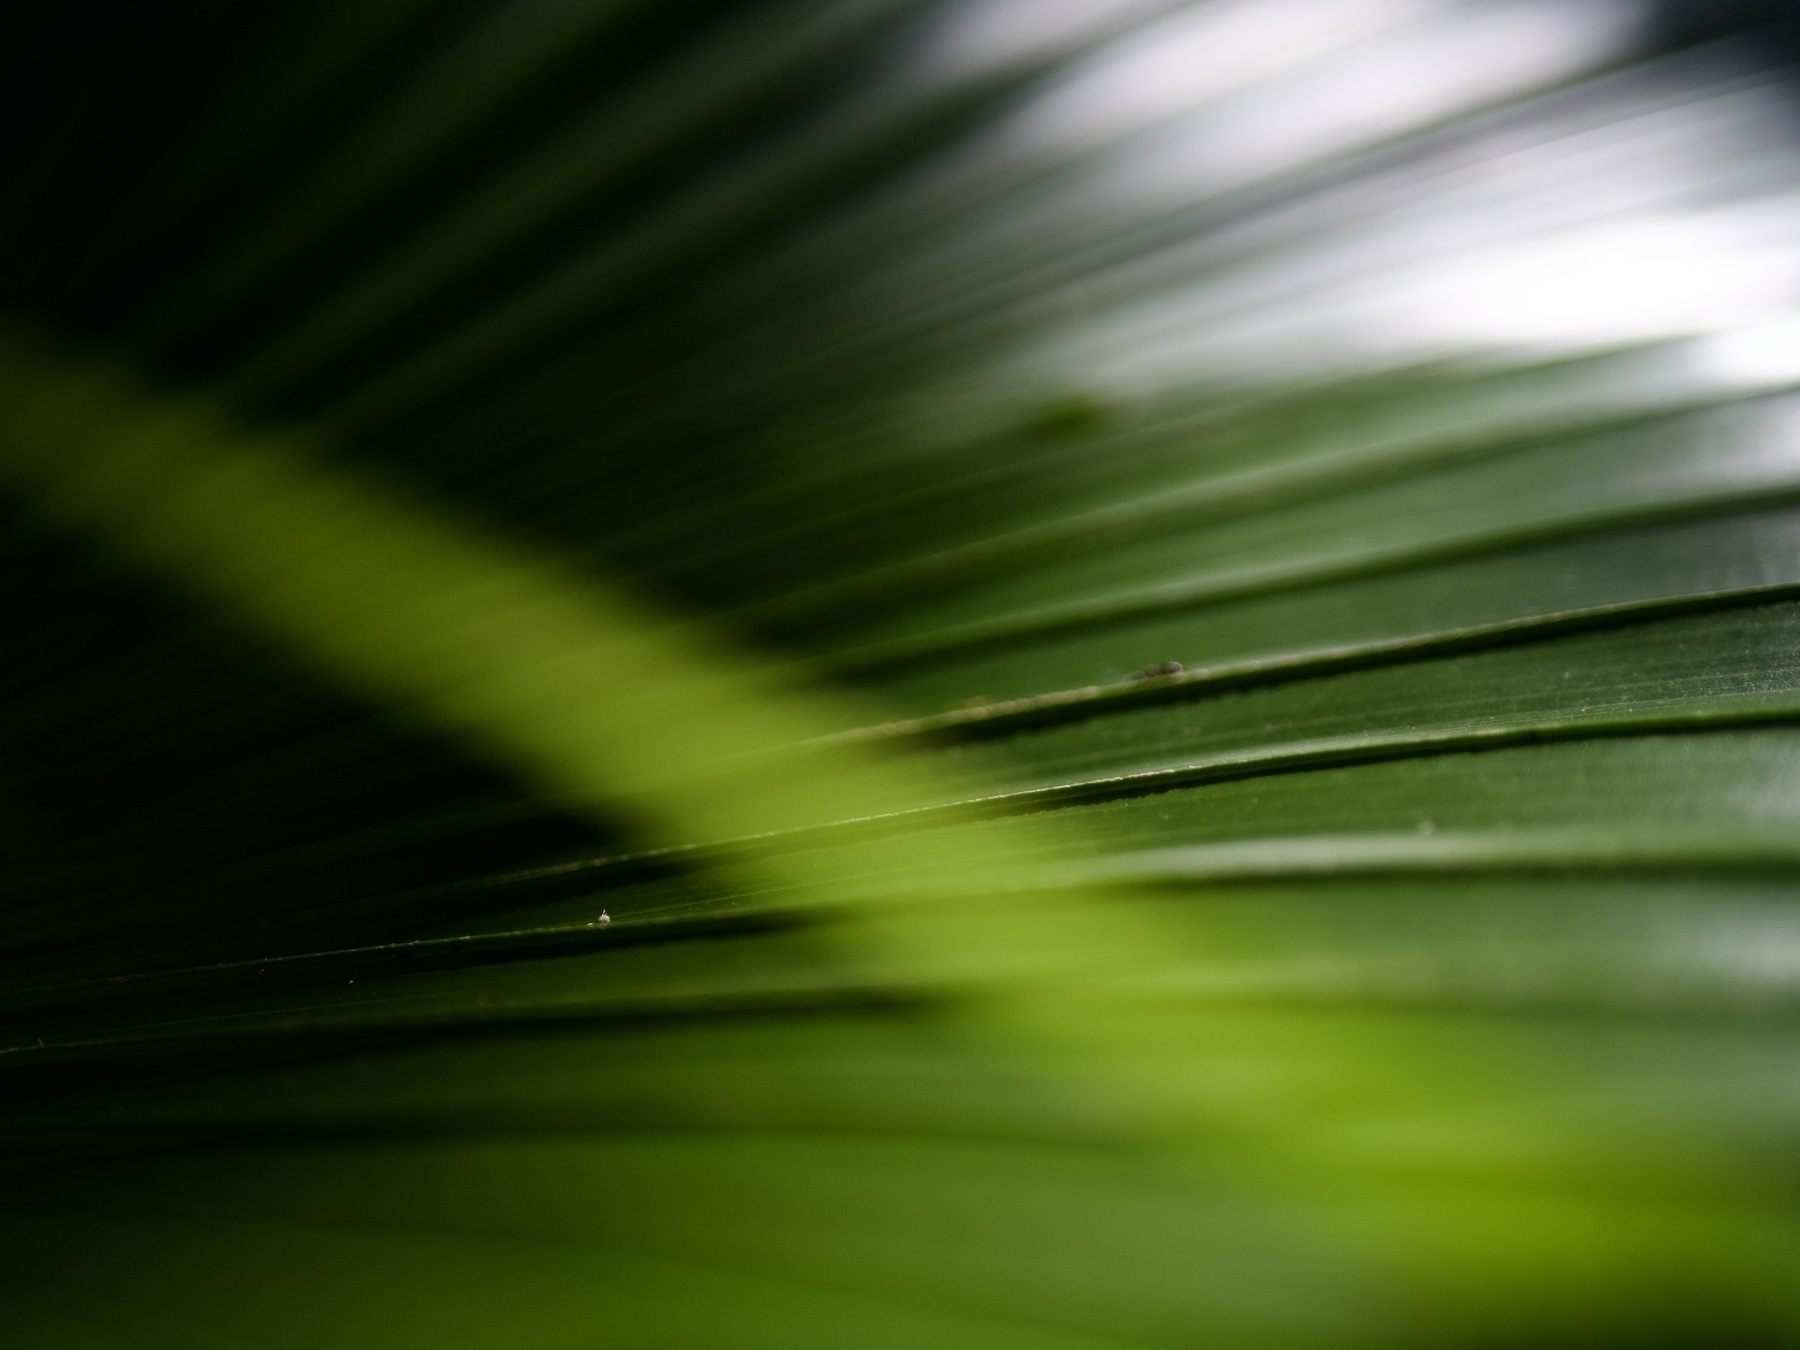 A close-up of a frond